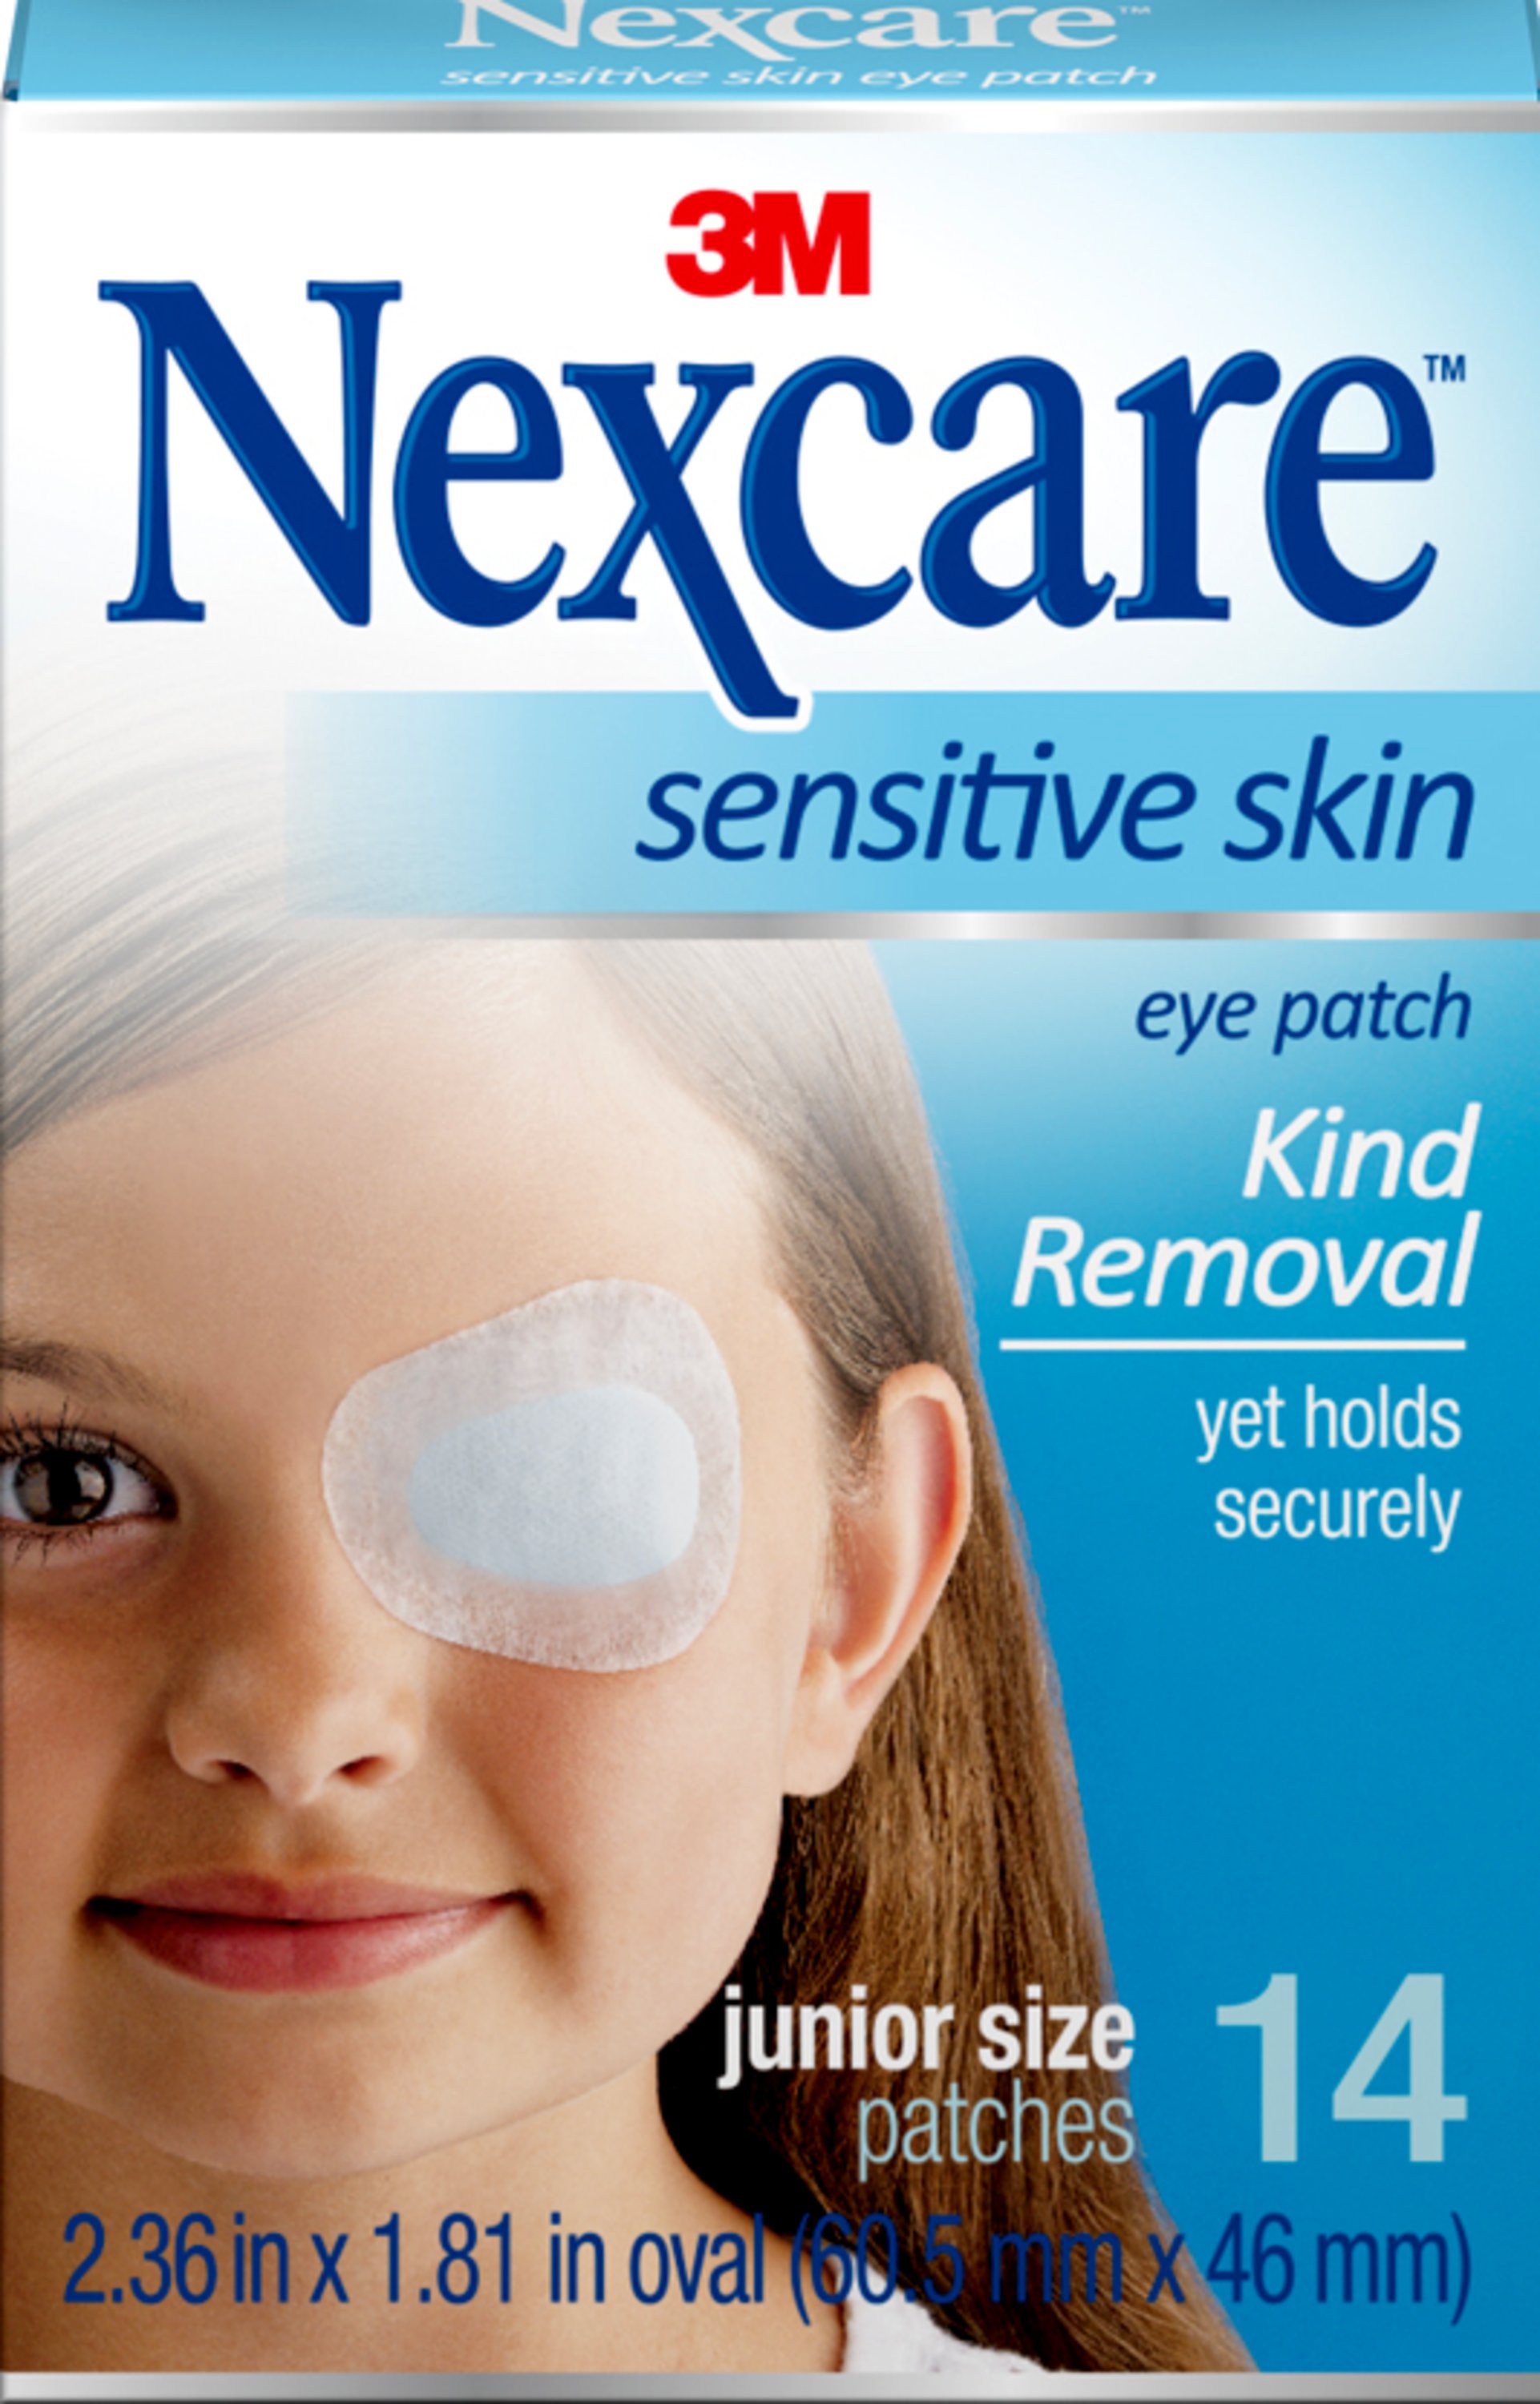 Nexcare Gentle Removal Orthoptic Eyepatch, Junior, 14 Count - image 1 of 5